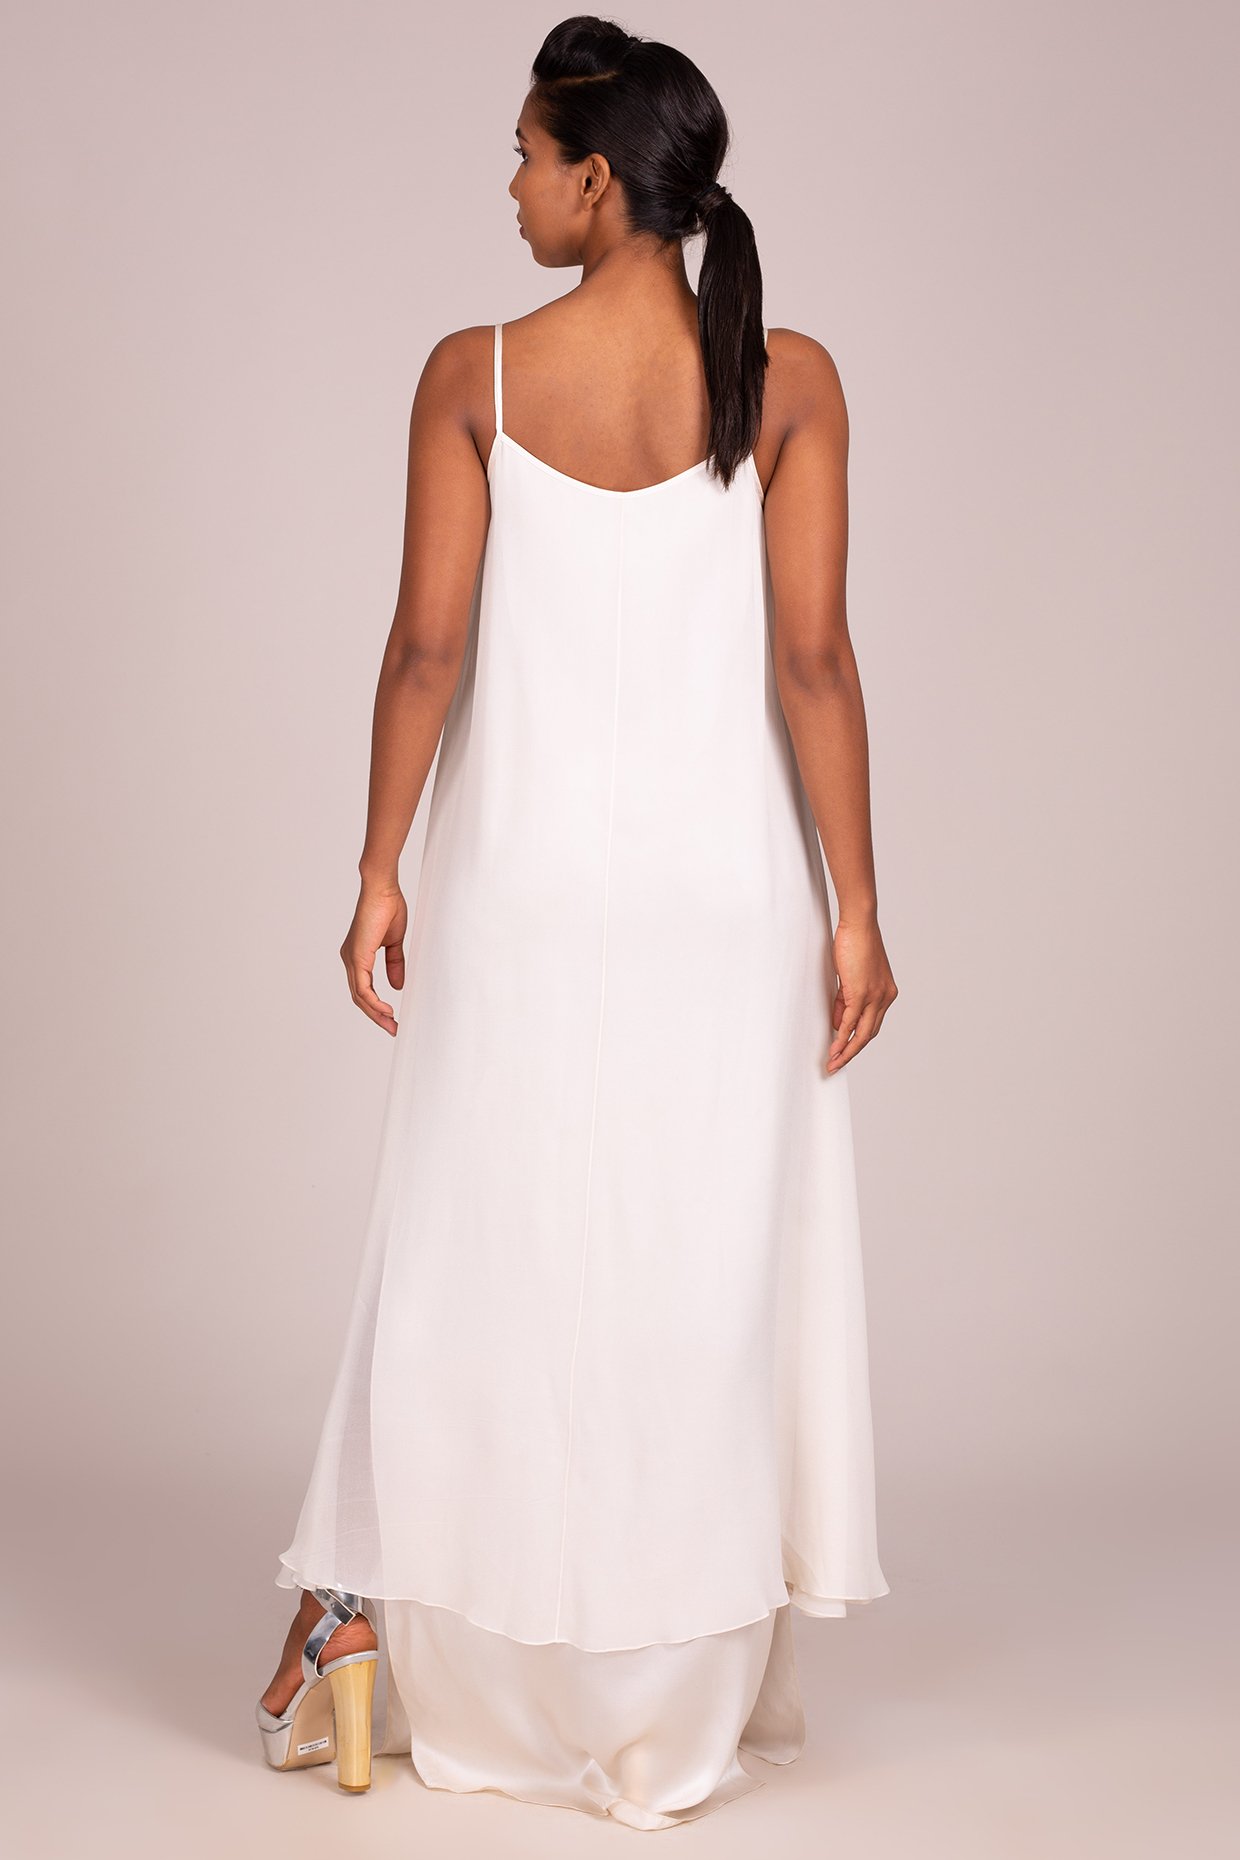 High-Low Printed Ball Gown with Necklace Collar | David's Bridal